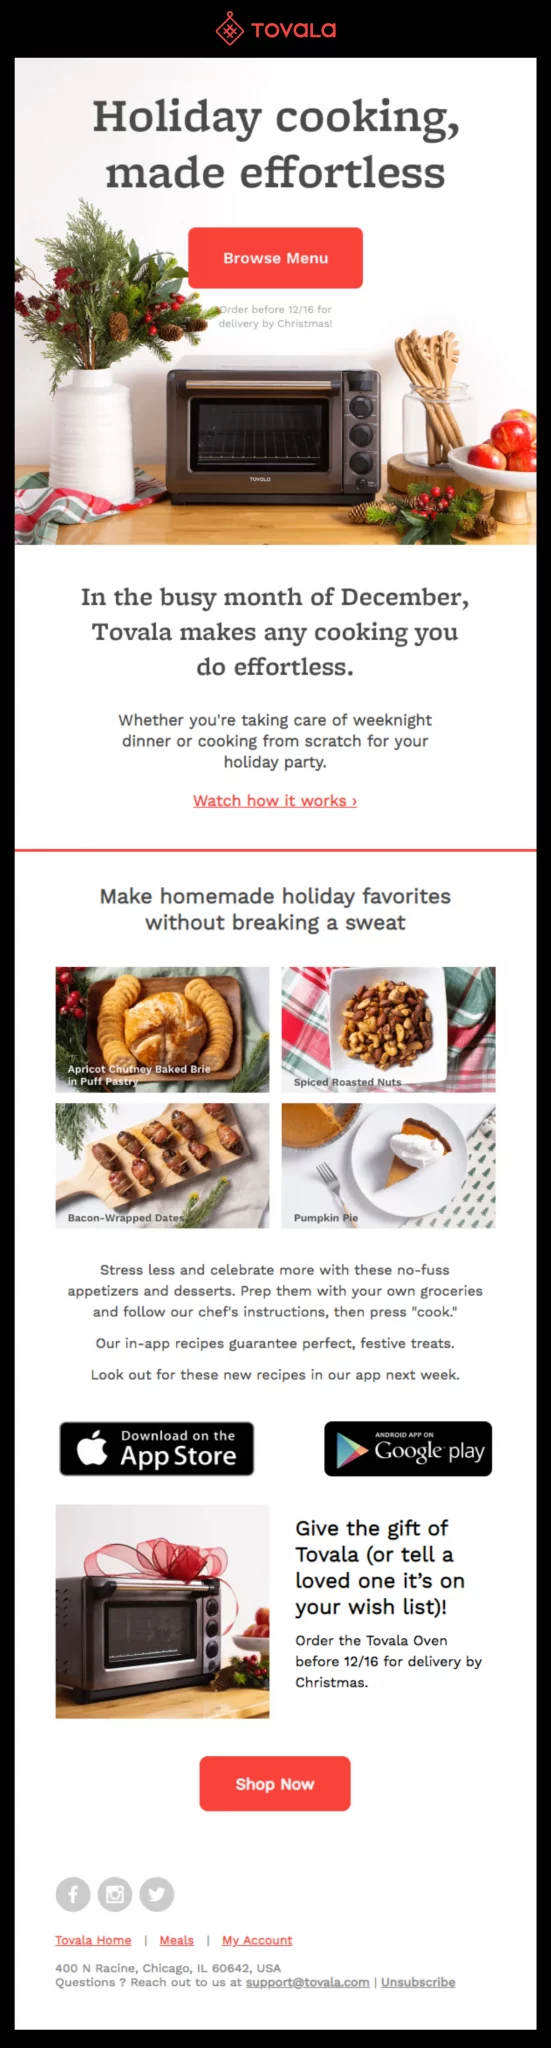 Tovala email newsletter tabletop smart Wi-Fi connected oven flower vases glass jar and apples on a platter different holiday favourite desserts pumpkin pie bacon wrapped dates spice roasted nuts baked brie puff pastry 